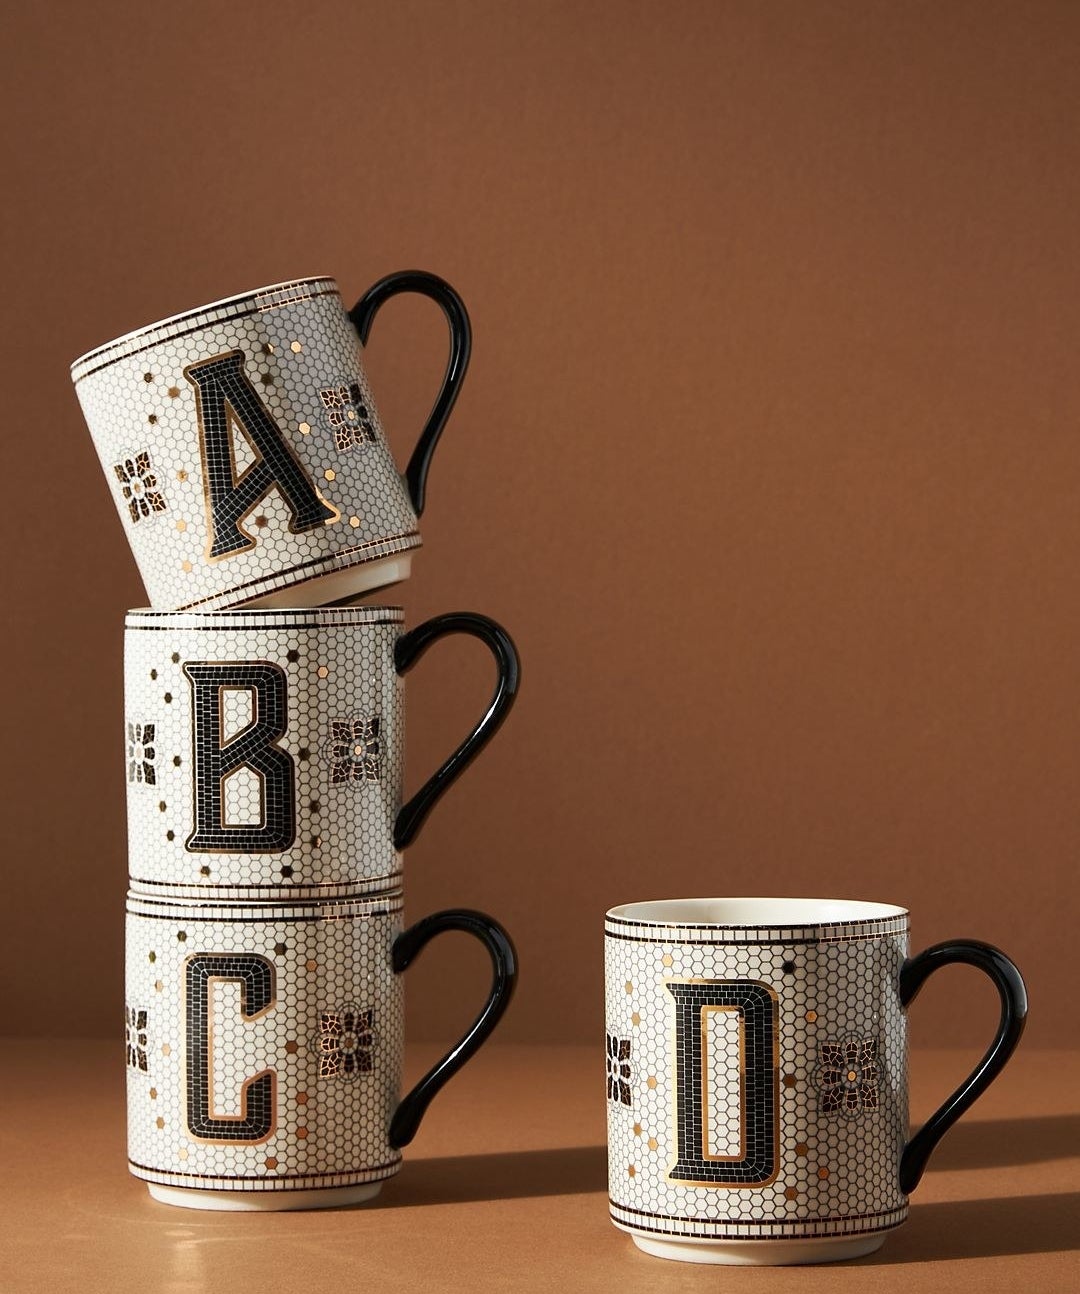 mugs monogrammed A, B, and C in a style that looks like black, white, and gold vintage tile